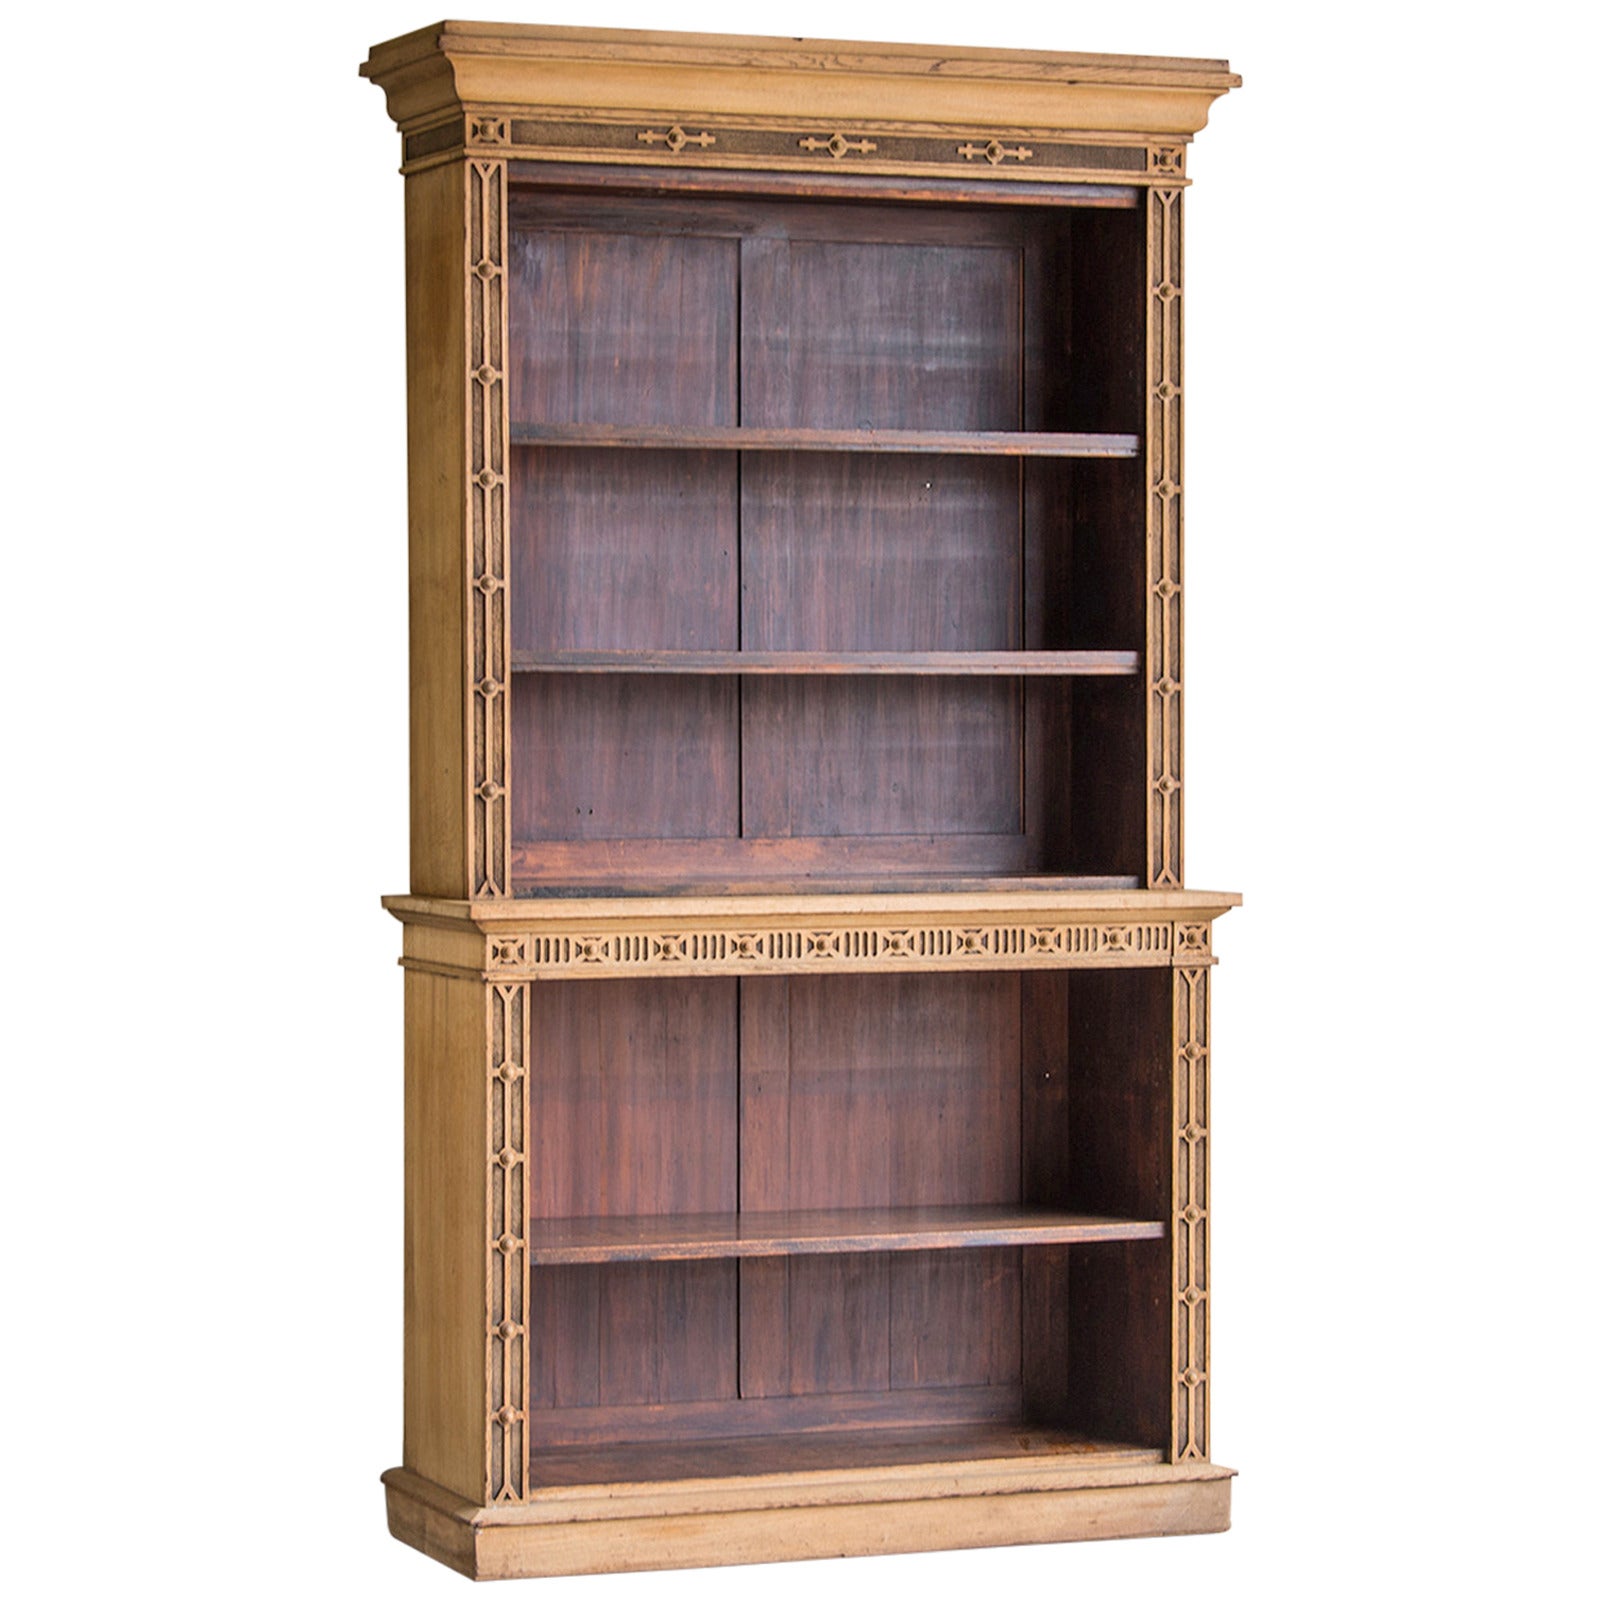 Antique French Louis Philippe Oak Bibliotheque Display Cabinet circa 1850